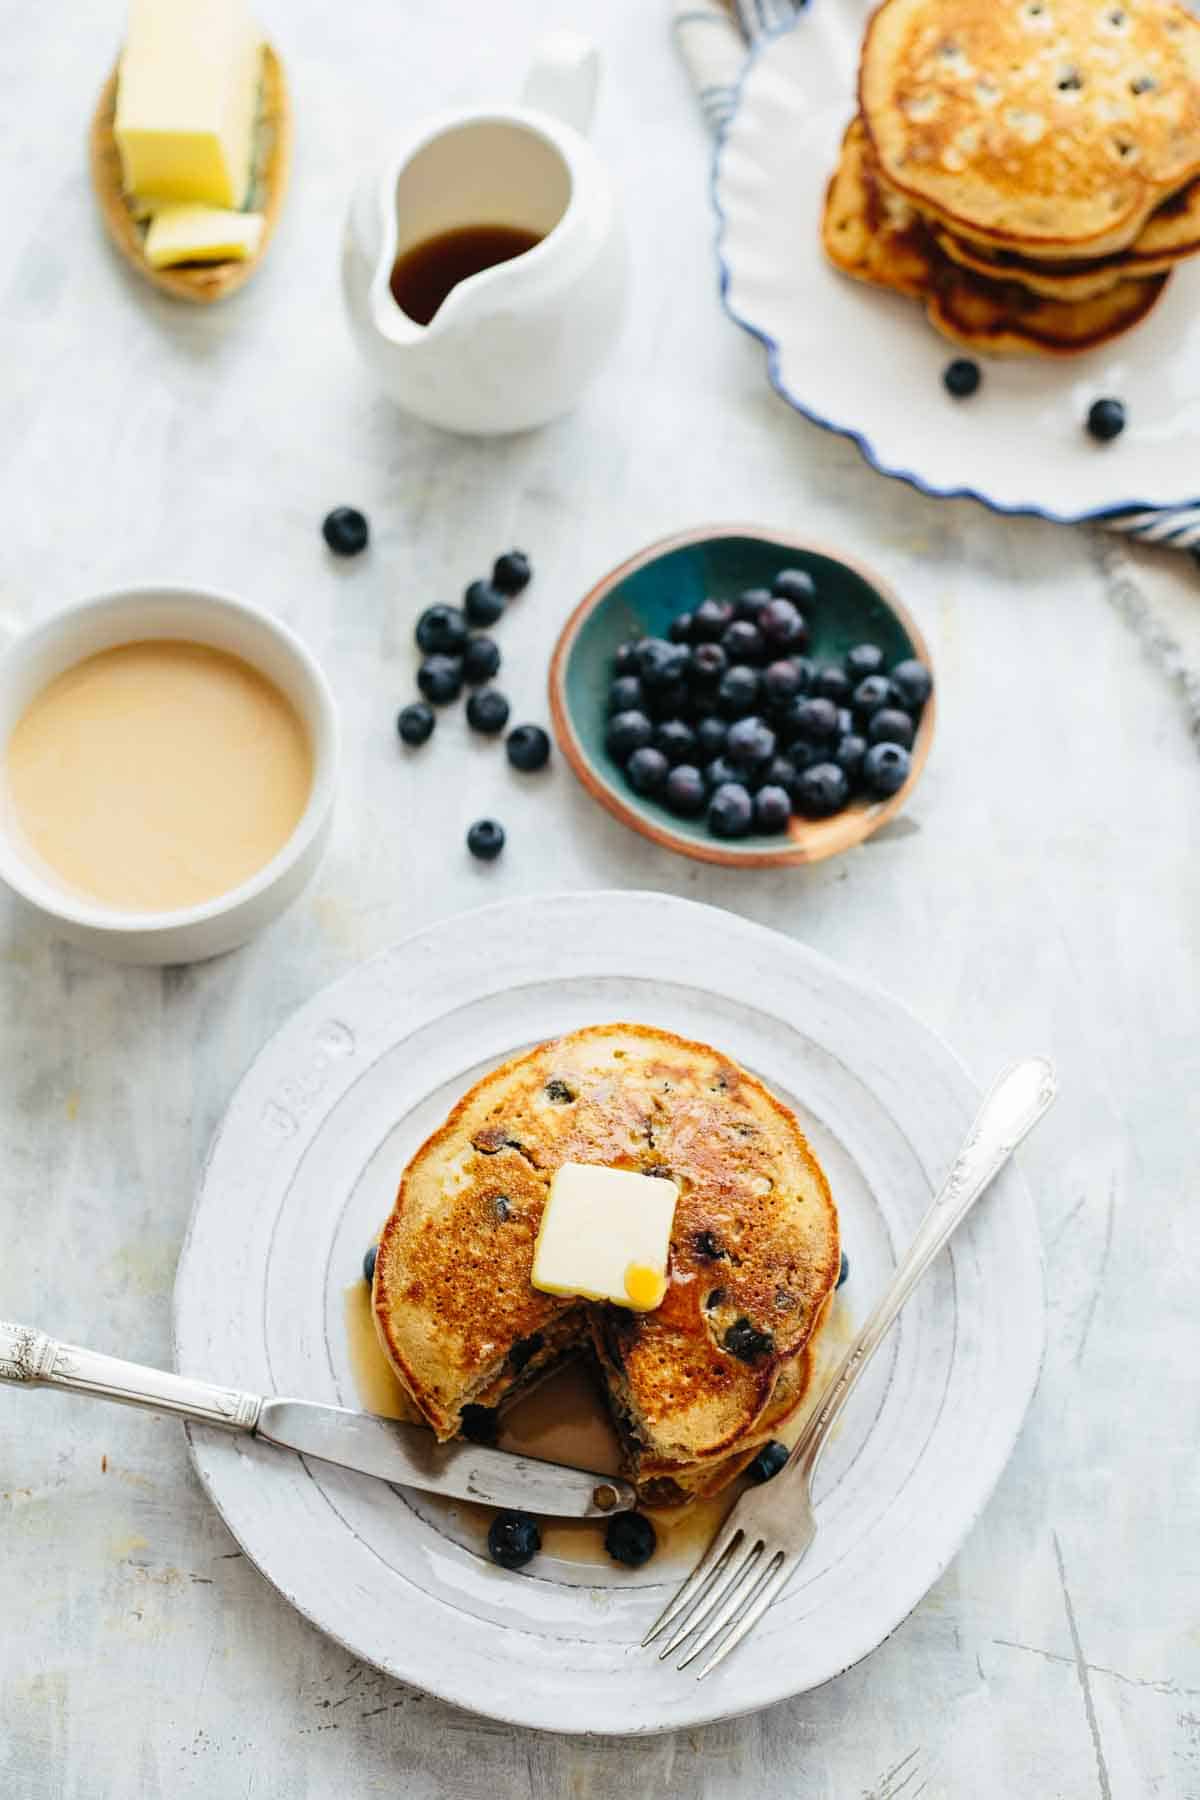 A breakfast table scape with pancakes, berries, coffee, butter and syrup.